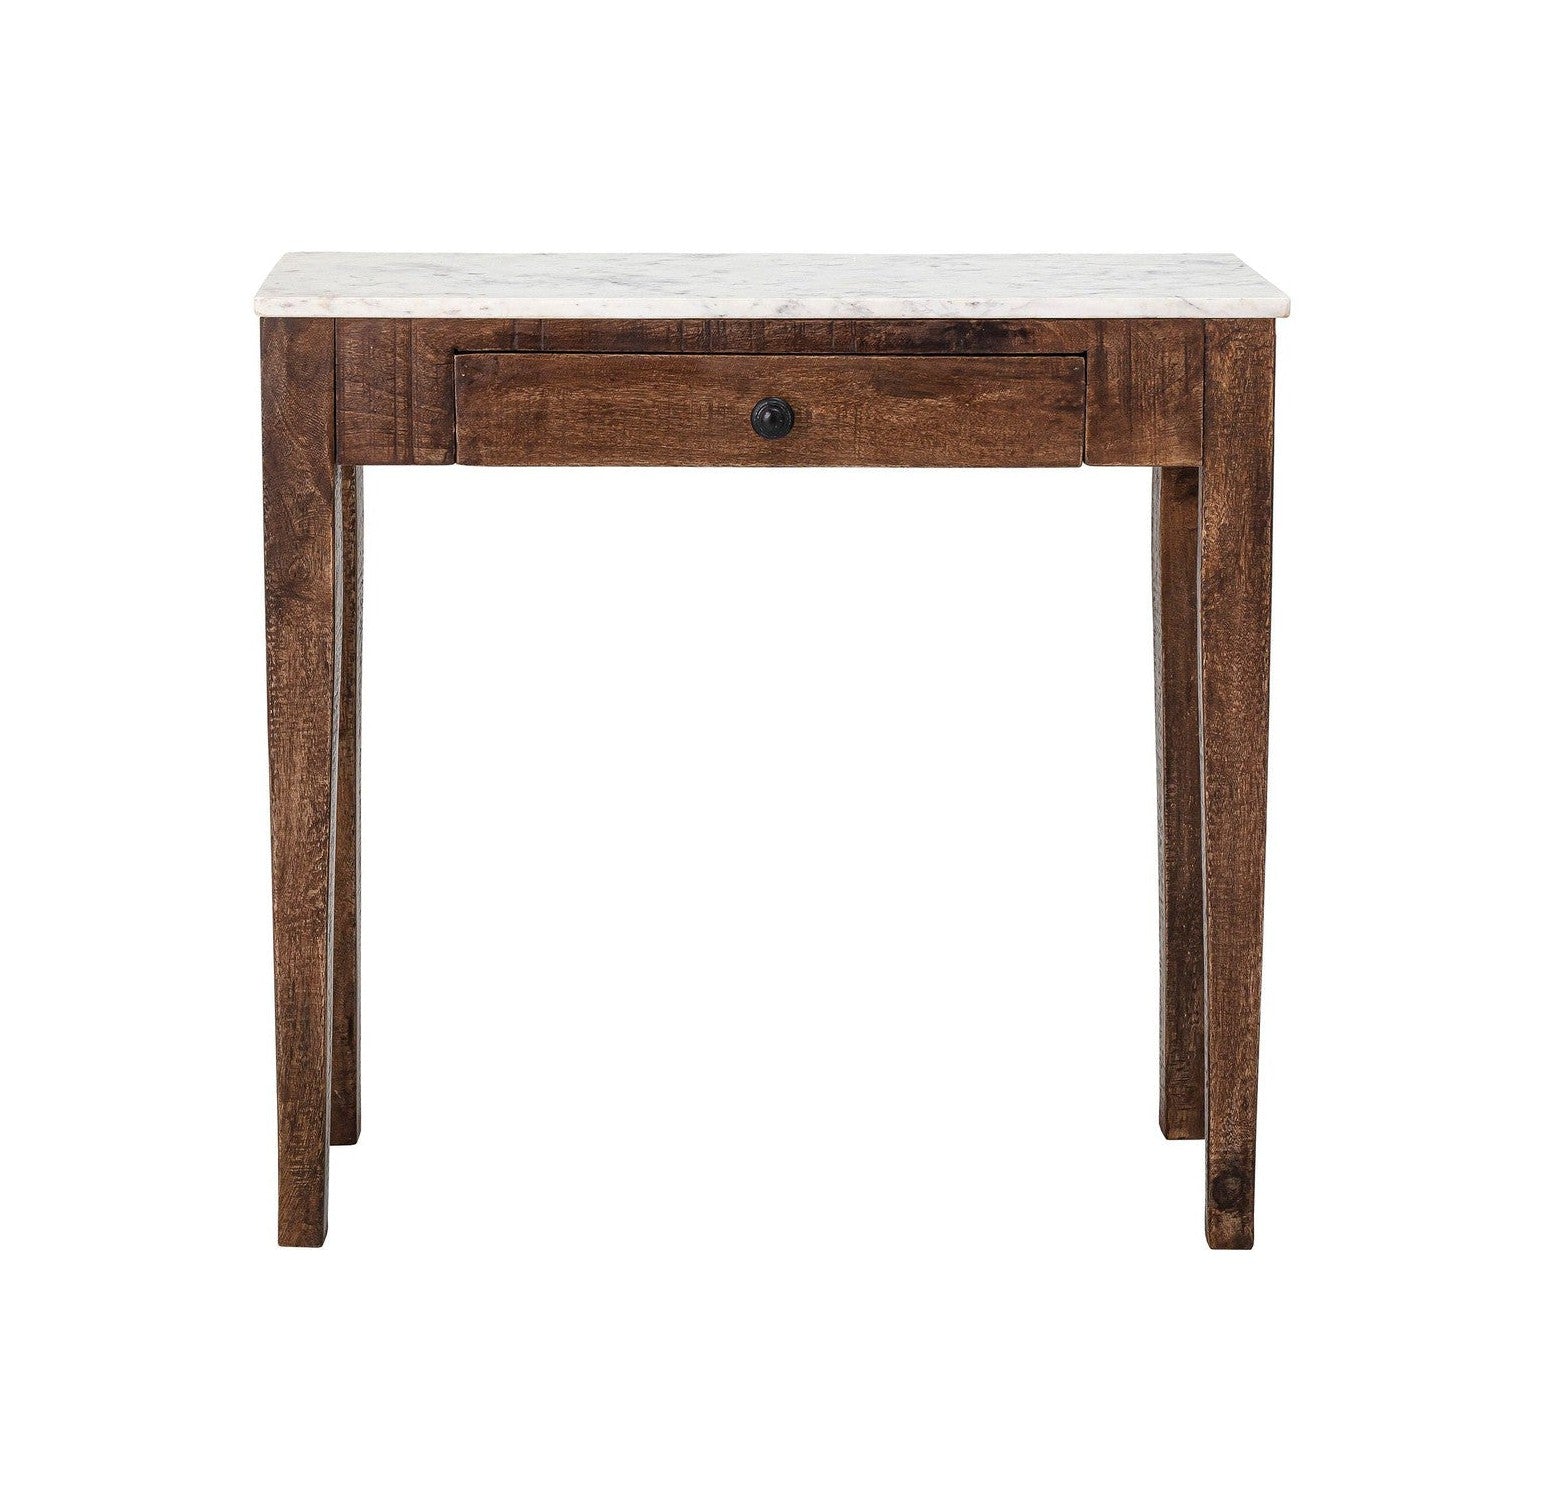 Creative Collection Hauge Console Table，Brown，大理石